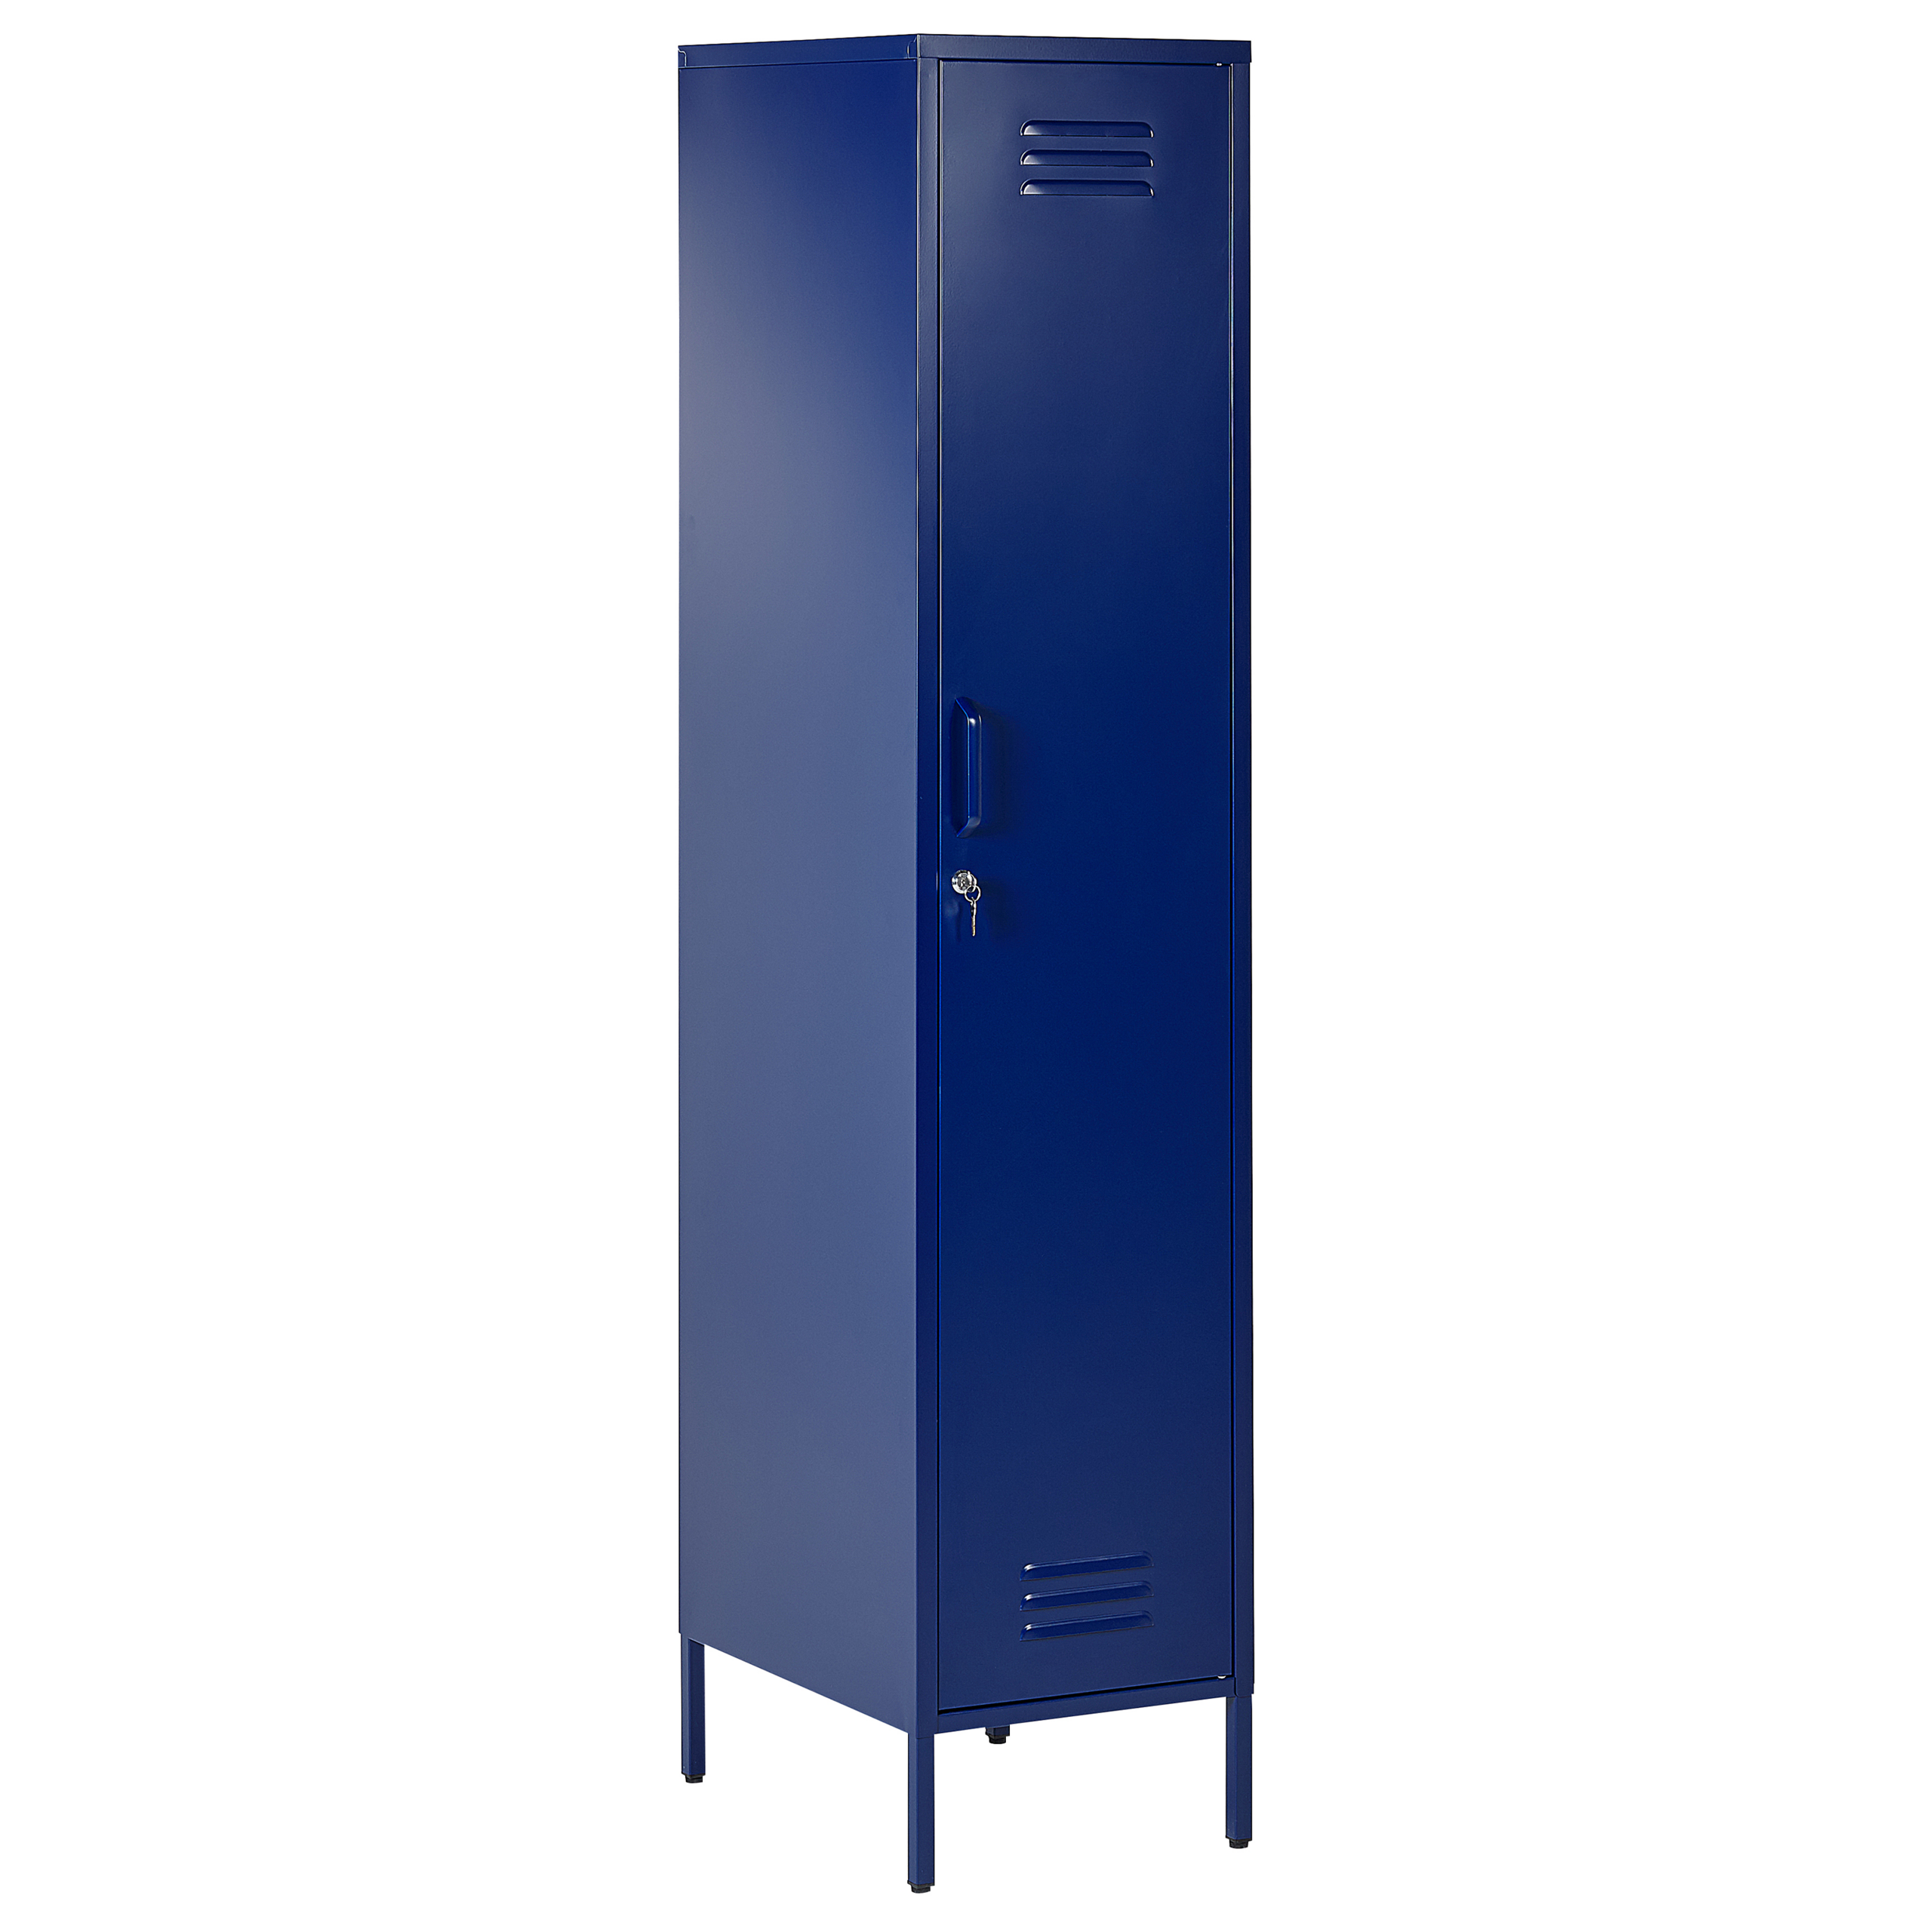 Beliani Storage Cabinet Navy Blue Metal Locker with 5 Shelves and Rail Modern Home Office Material:Steel Size:50x185x38